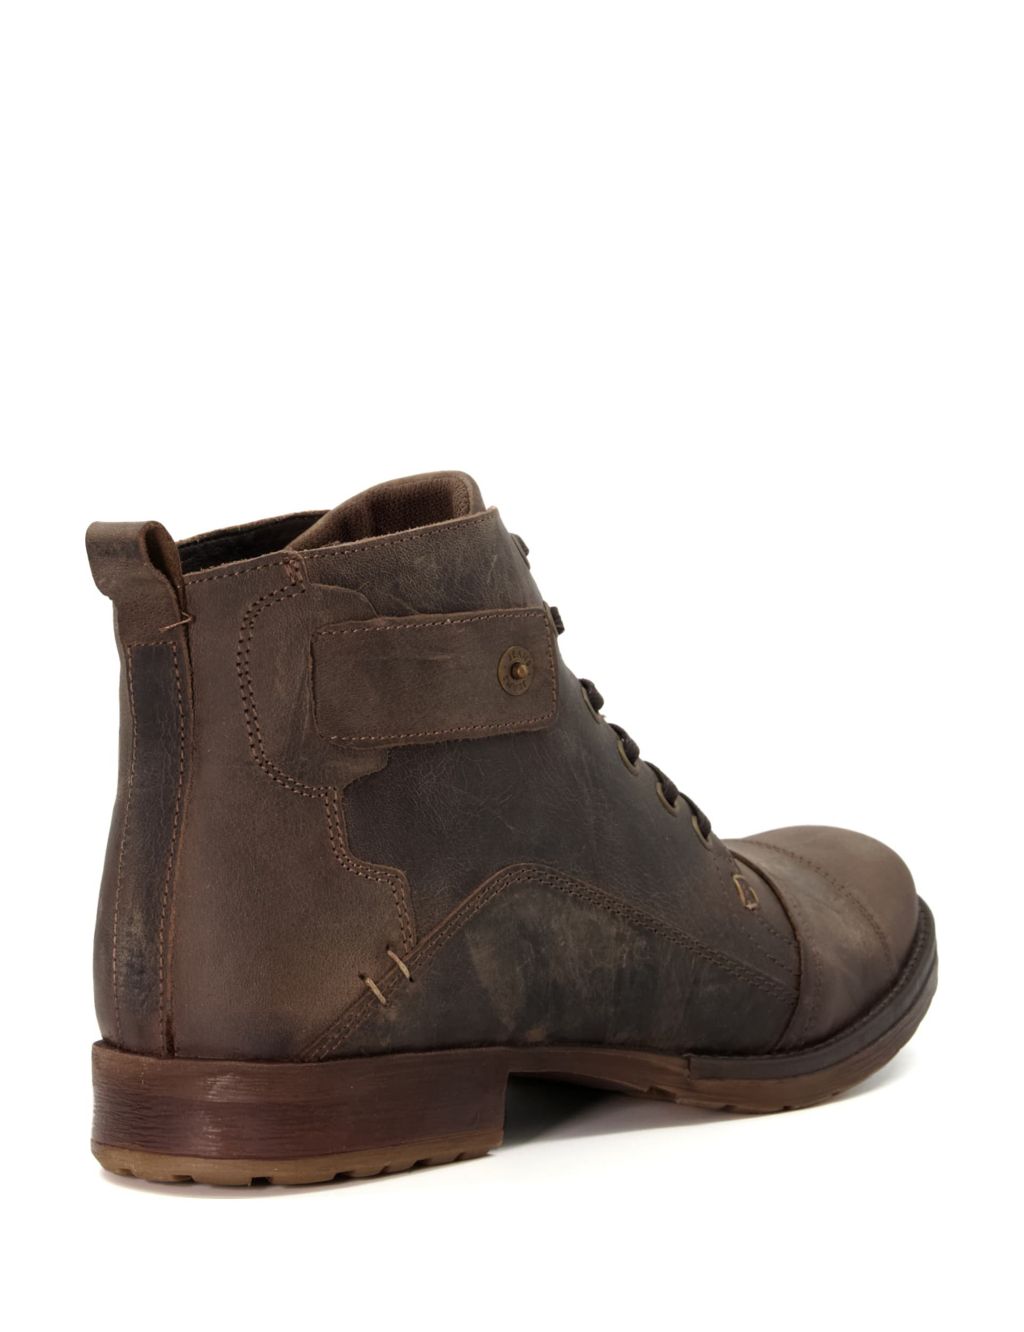 Leather Casual Boots image 5